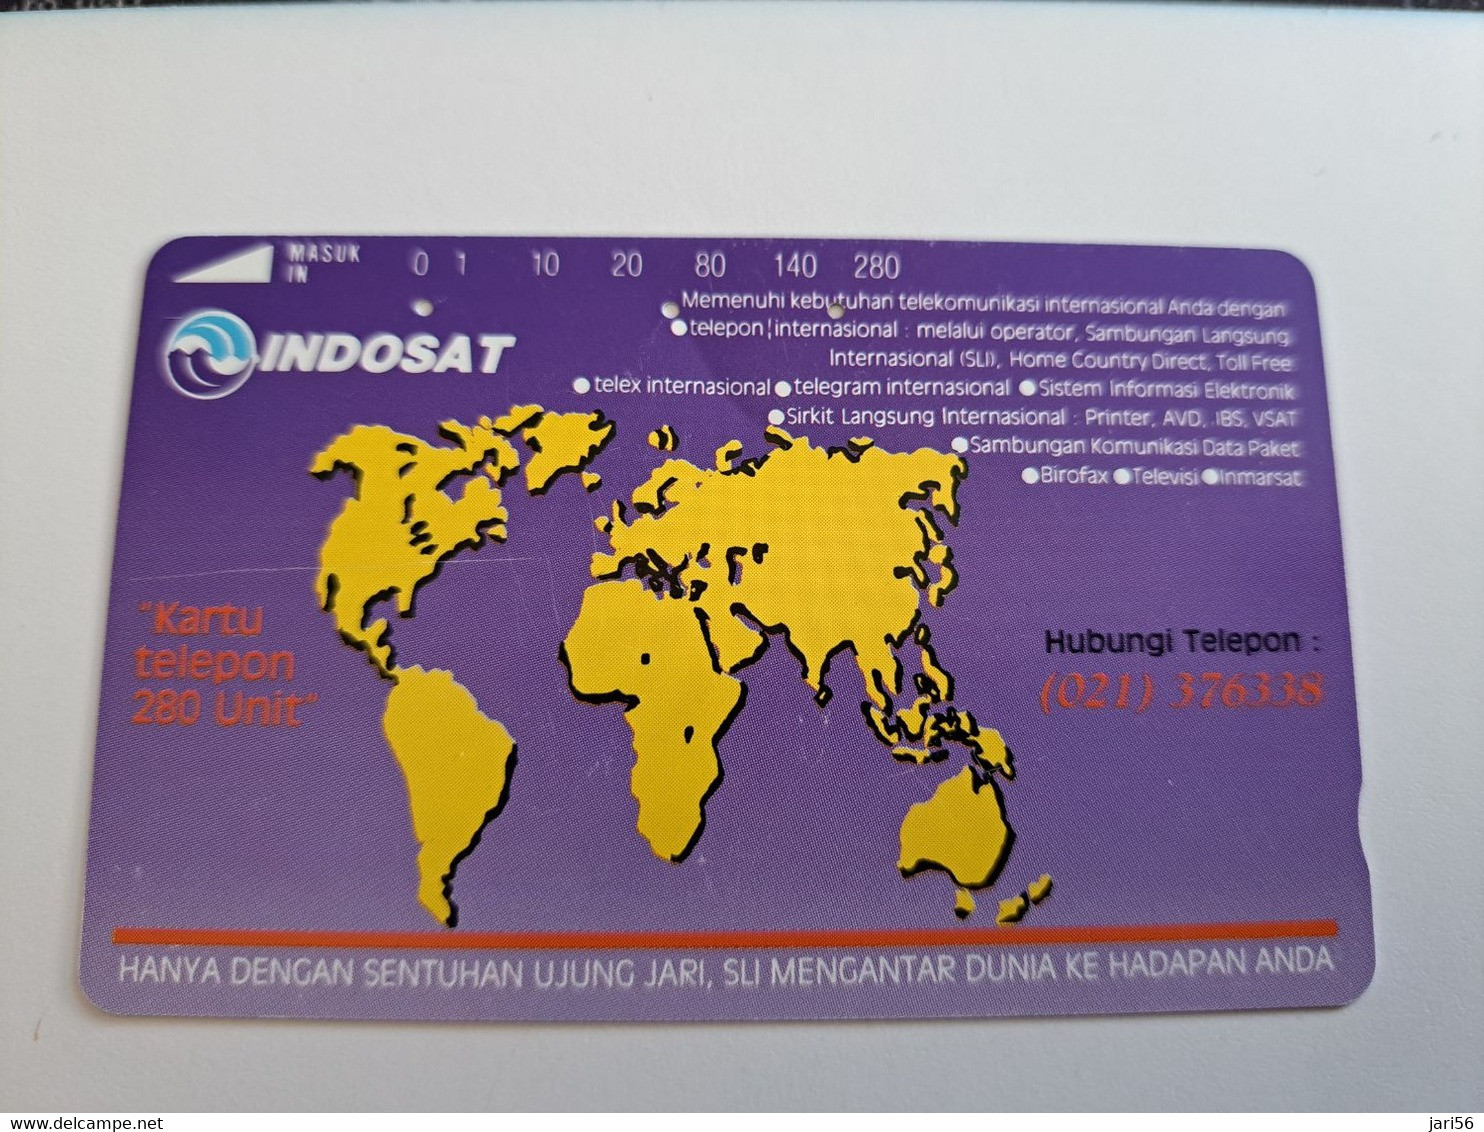 INDONESIA MAGNETIC/TAMURA  280  UNITS / WORLD MAP           MAGNETIC   CARD    **9849** - Indonesia